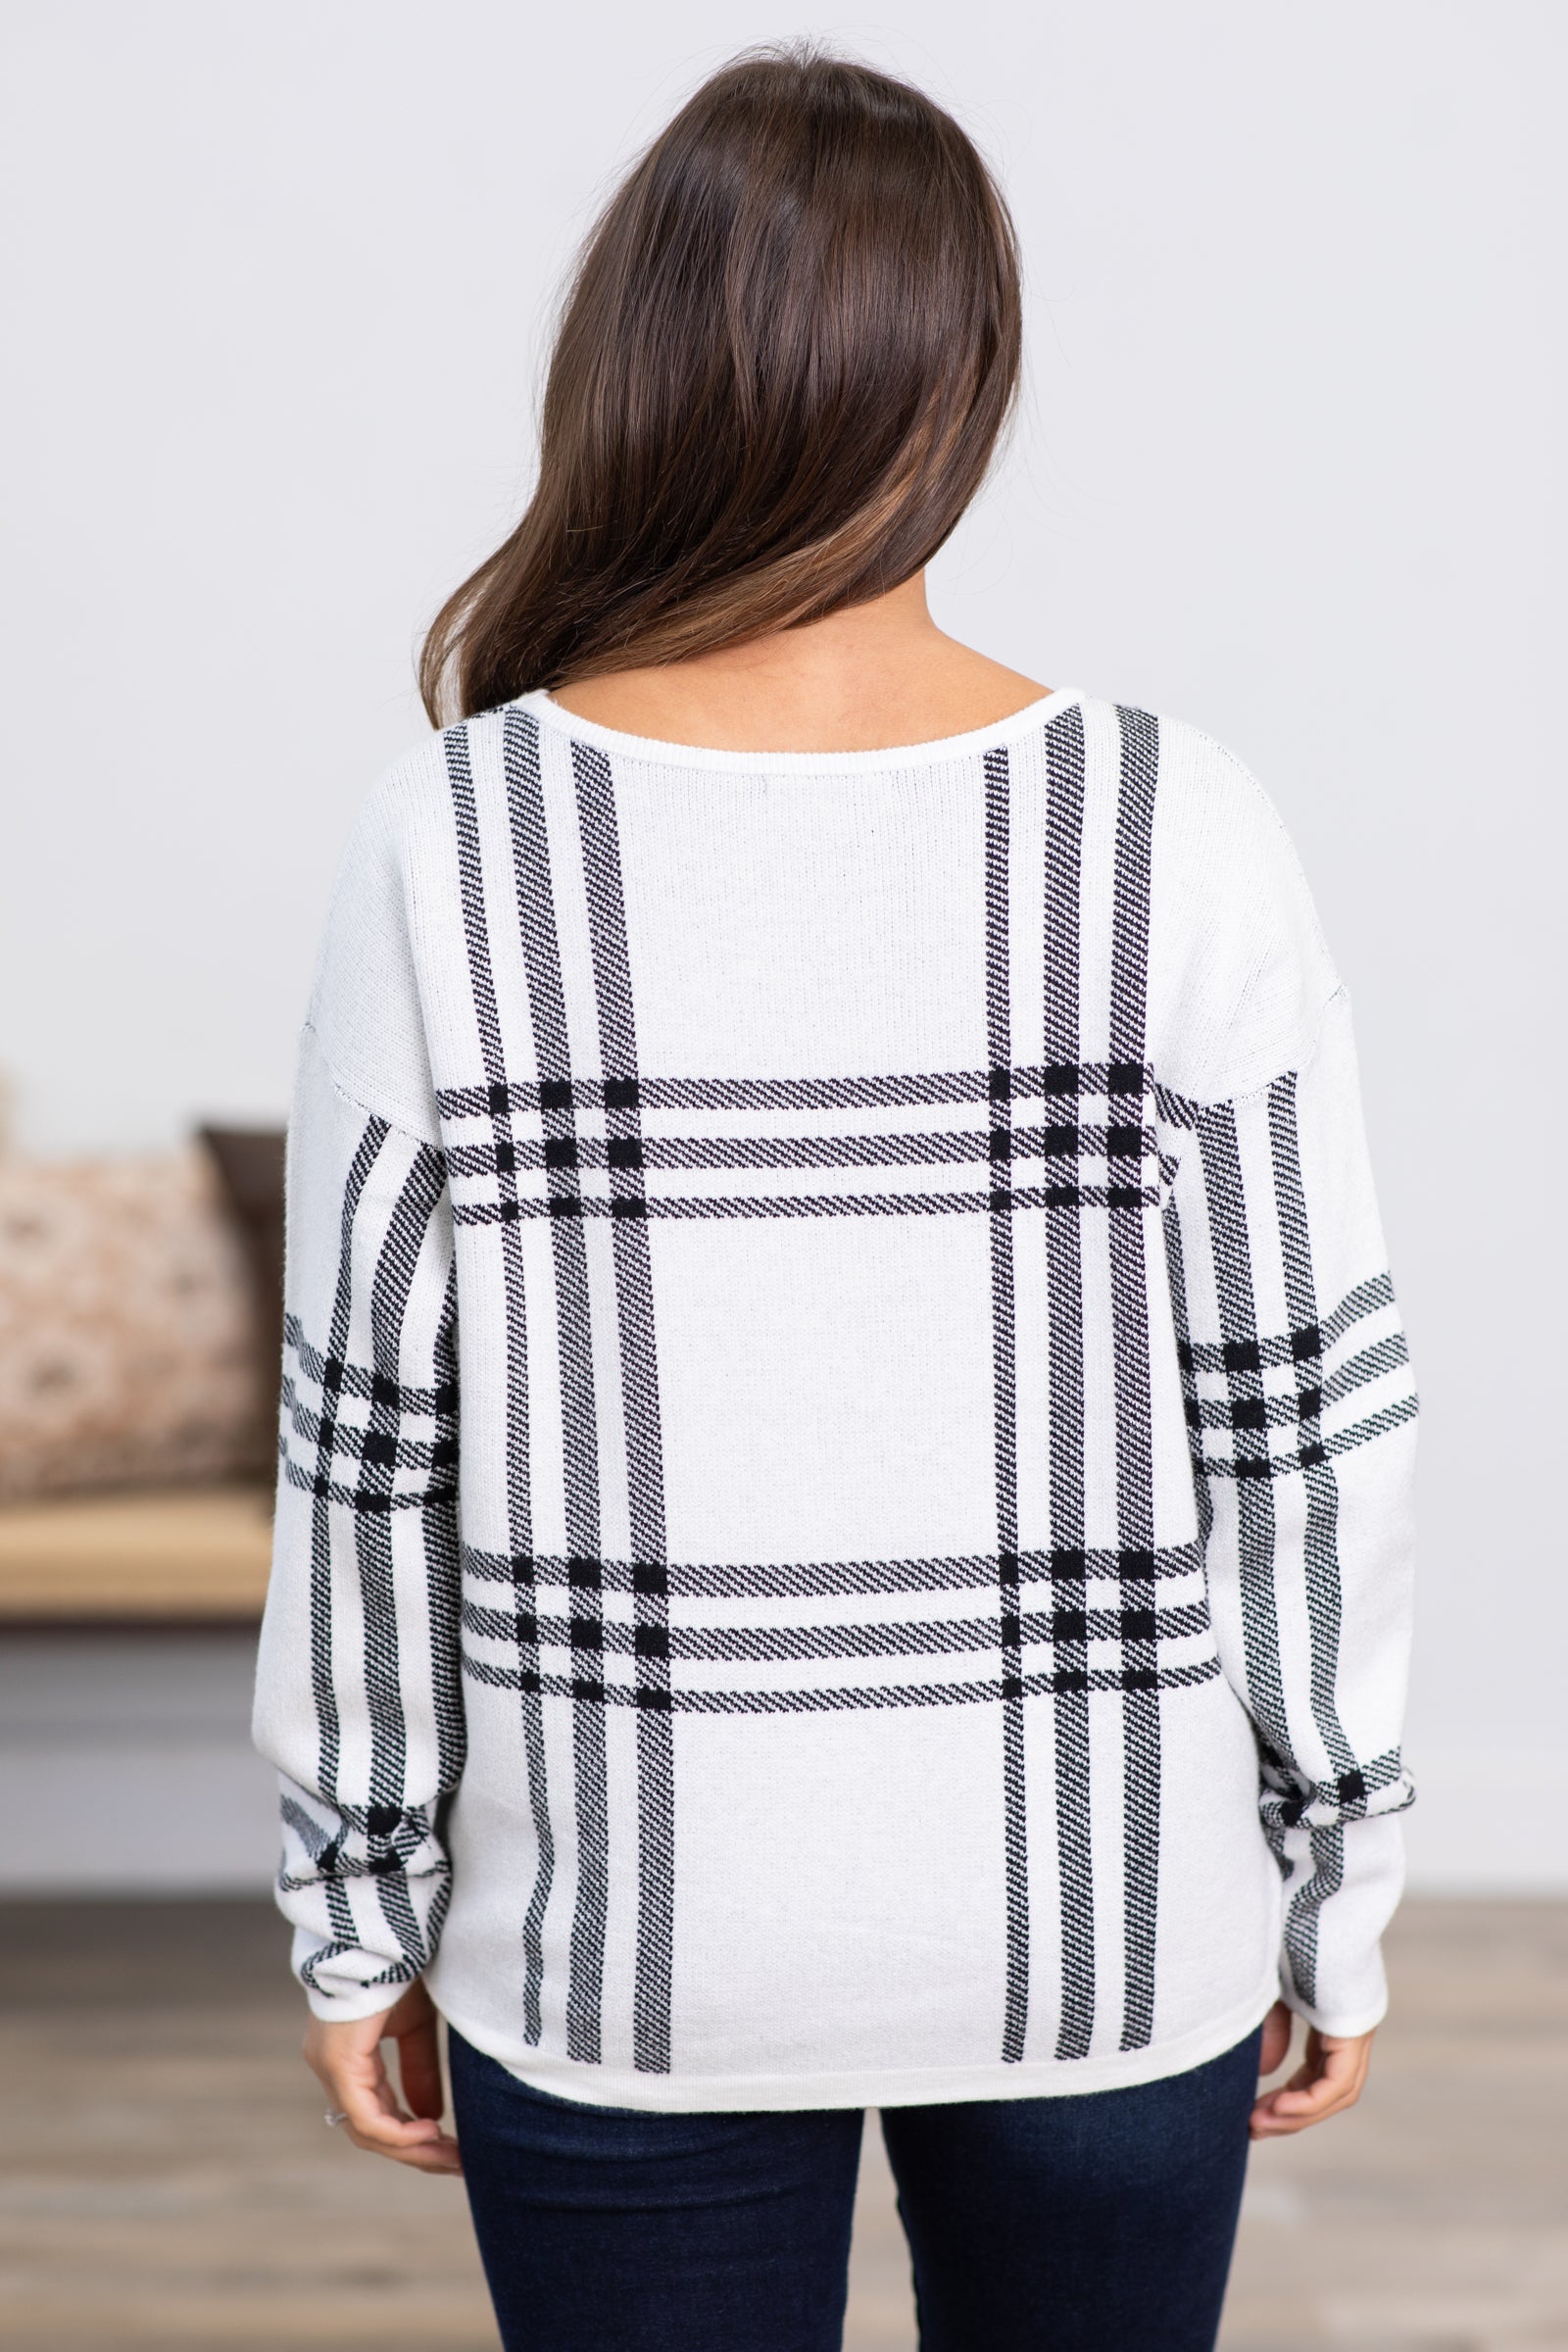 Off White and Black Plaid Sweater